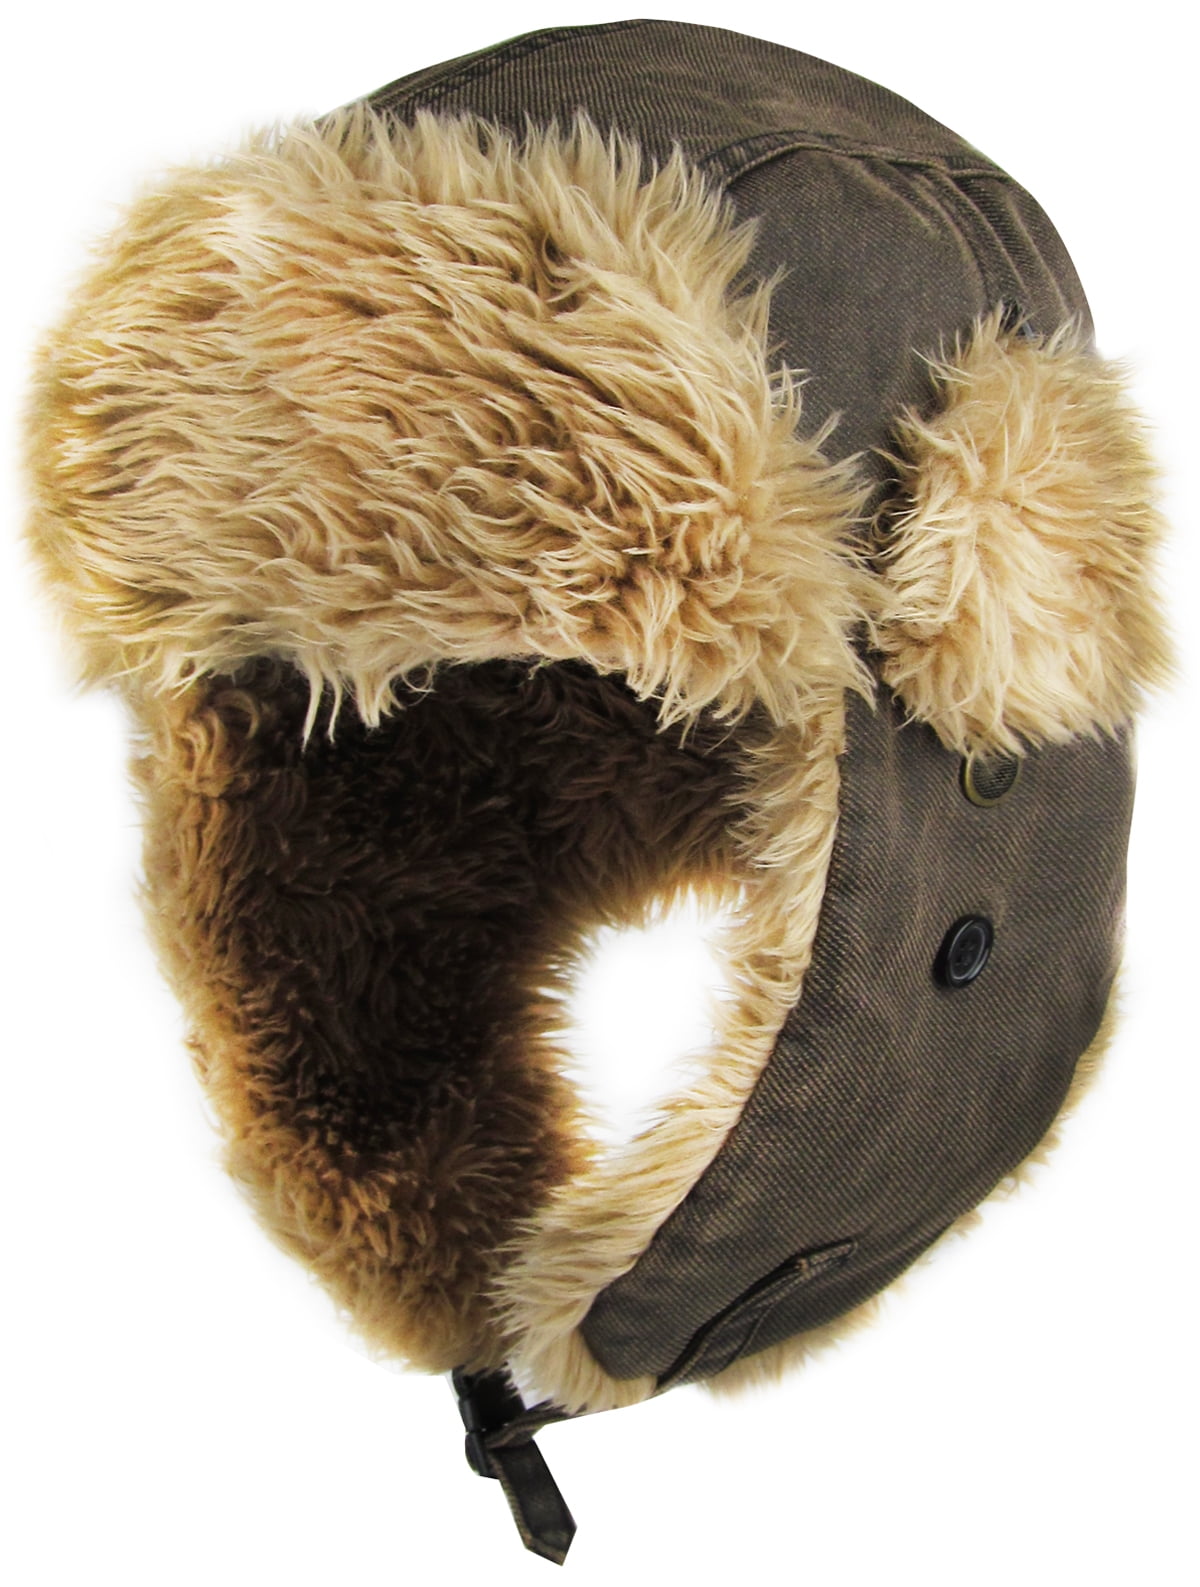 Winter Bomber Hat Unisex with Badge Dad Hats Faux Rabbit Fur Soldier Army Aviator Trapper Snow Ski Cap 